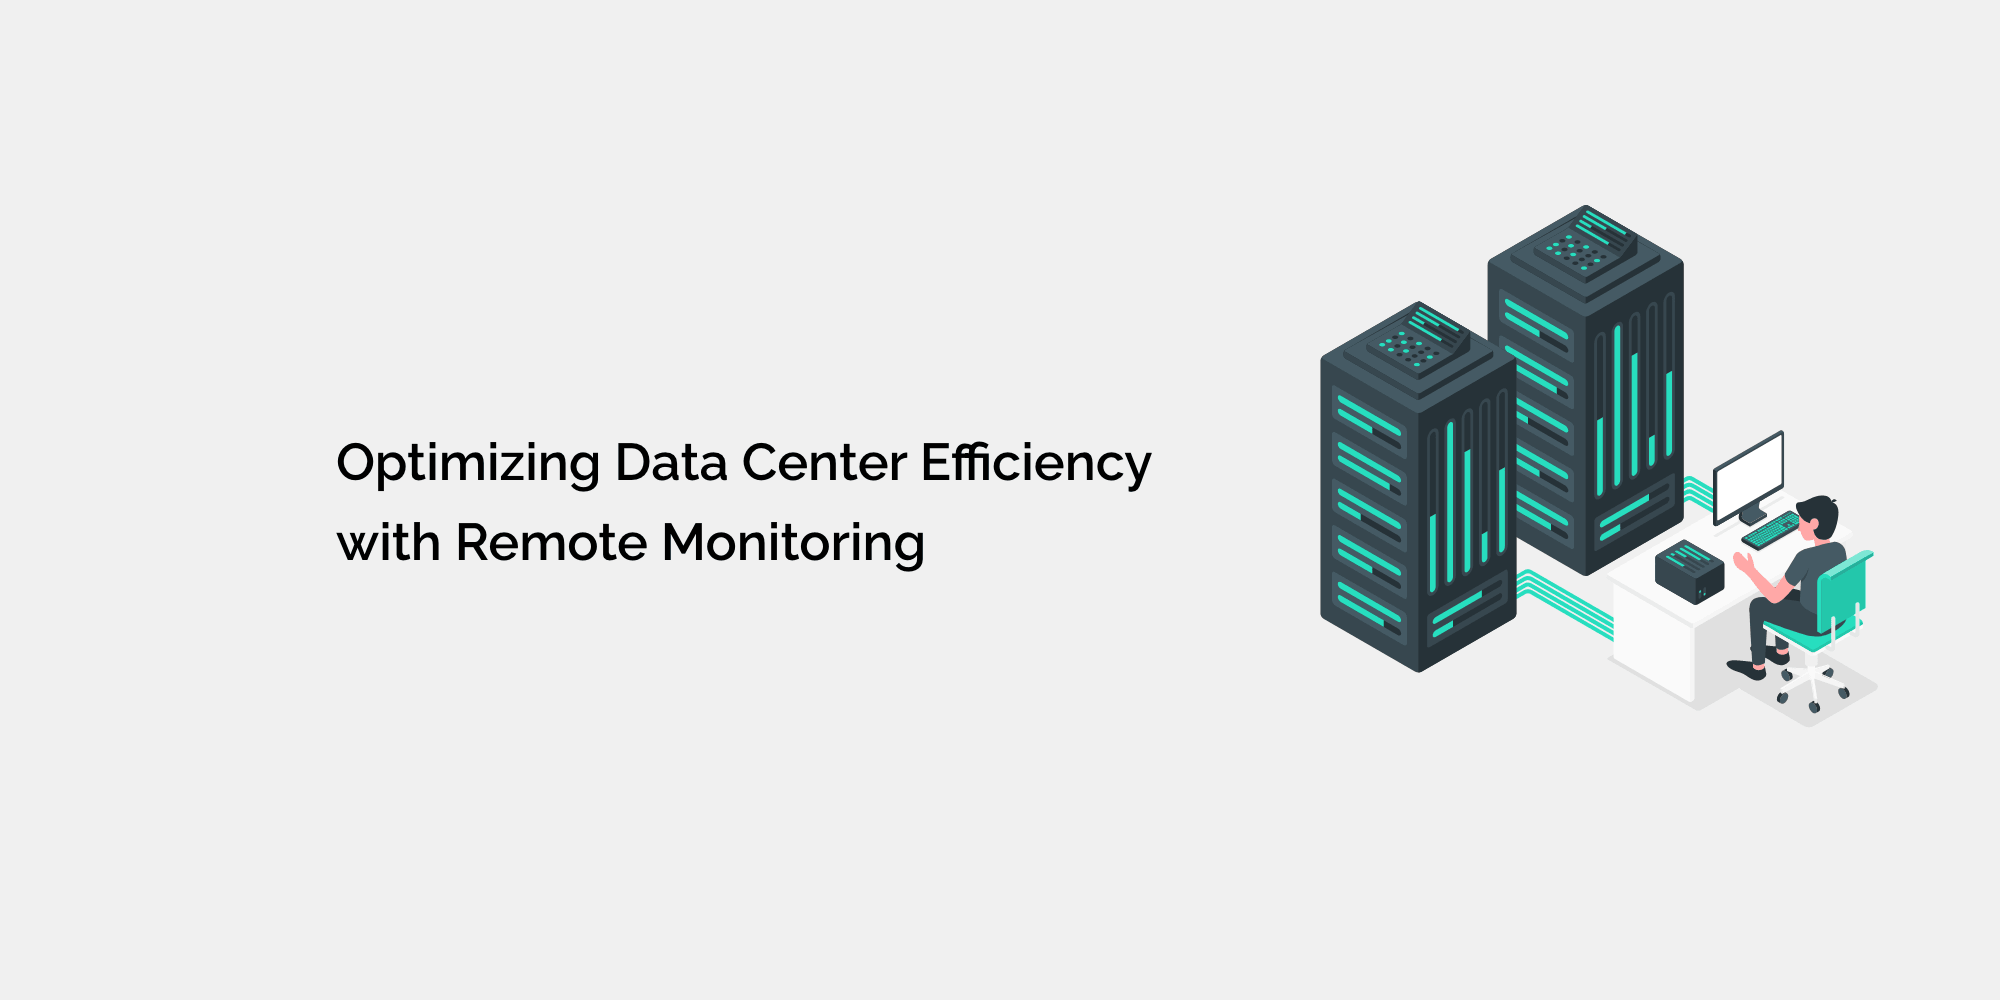 Optimizing Data Center Efficiency with Remote Monitoring